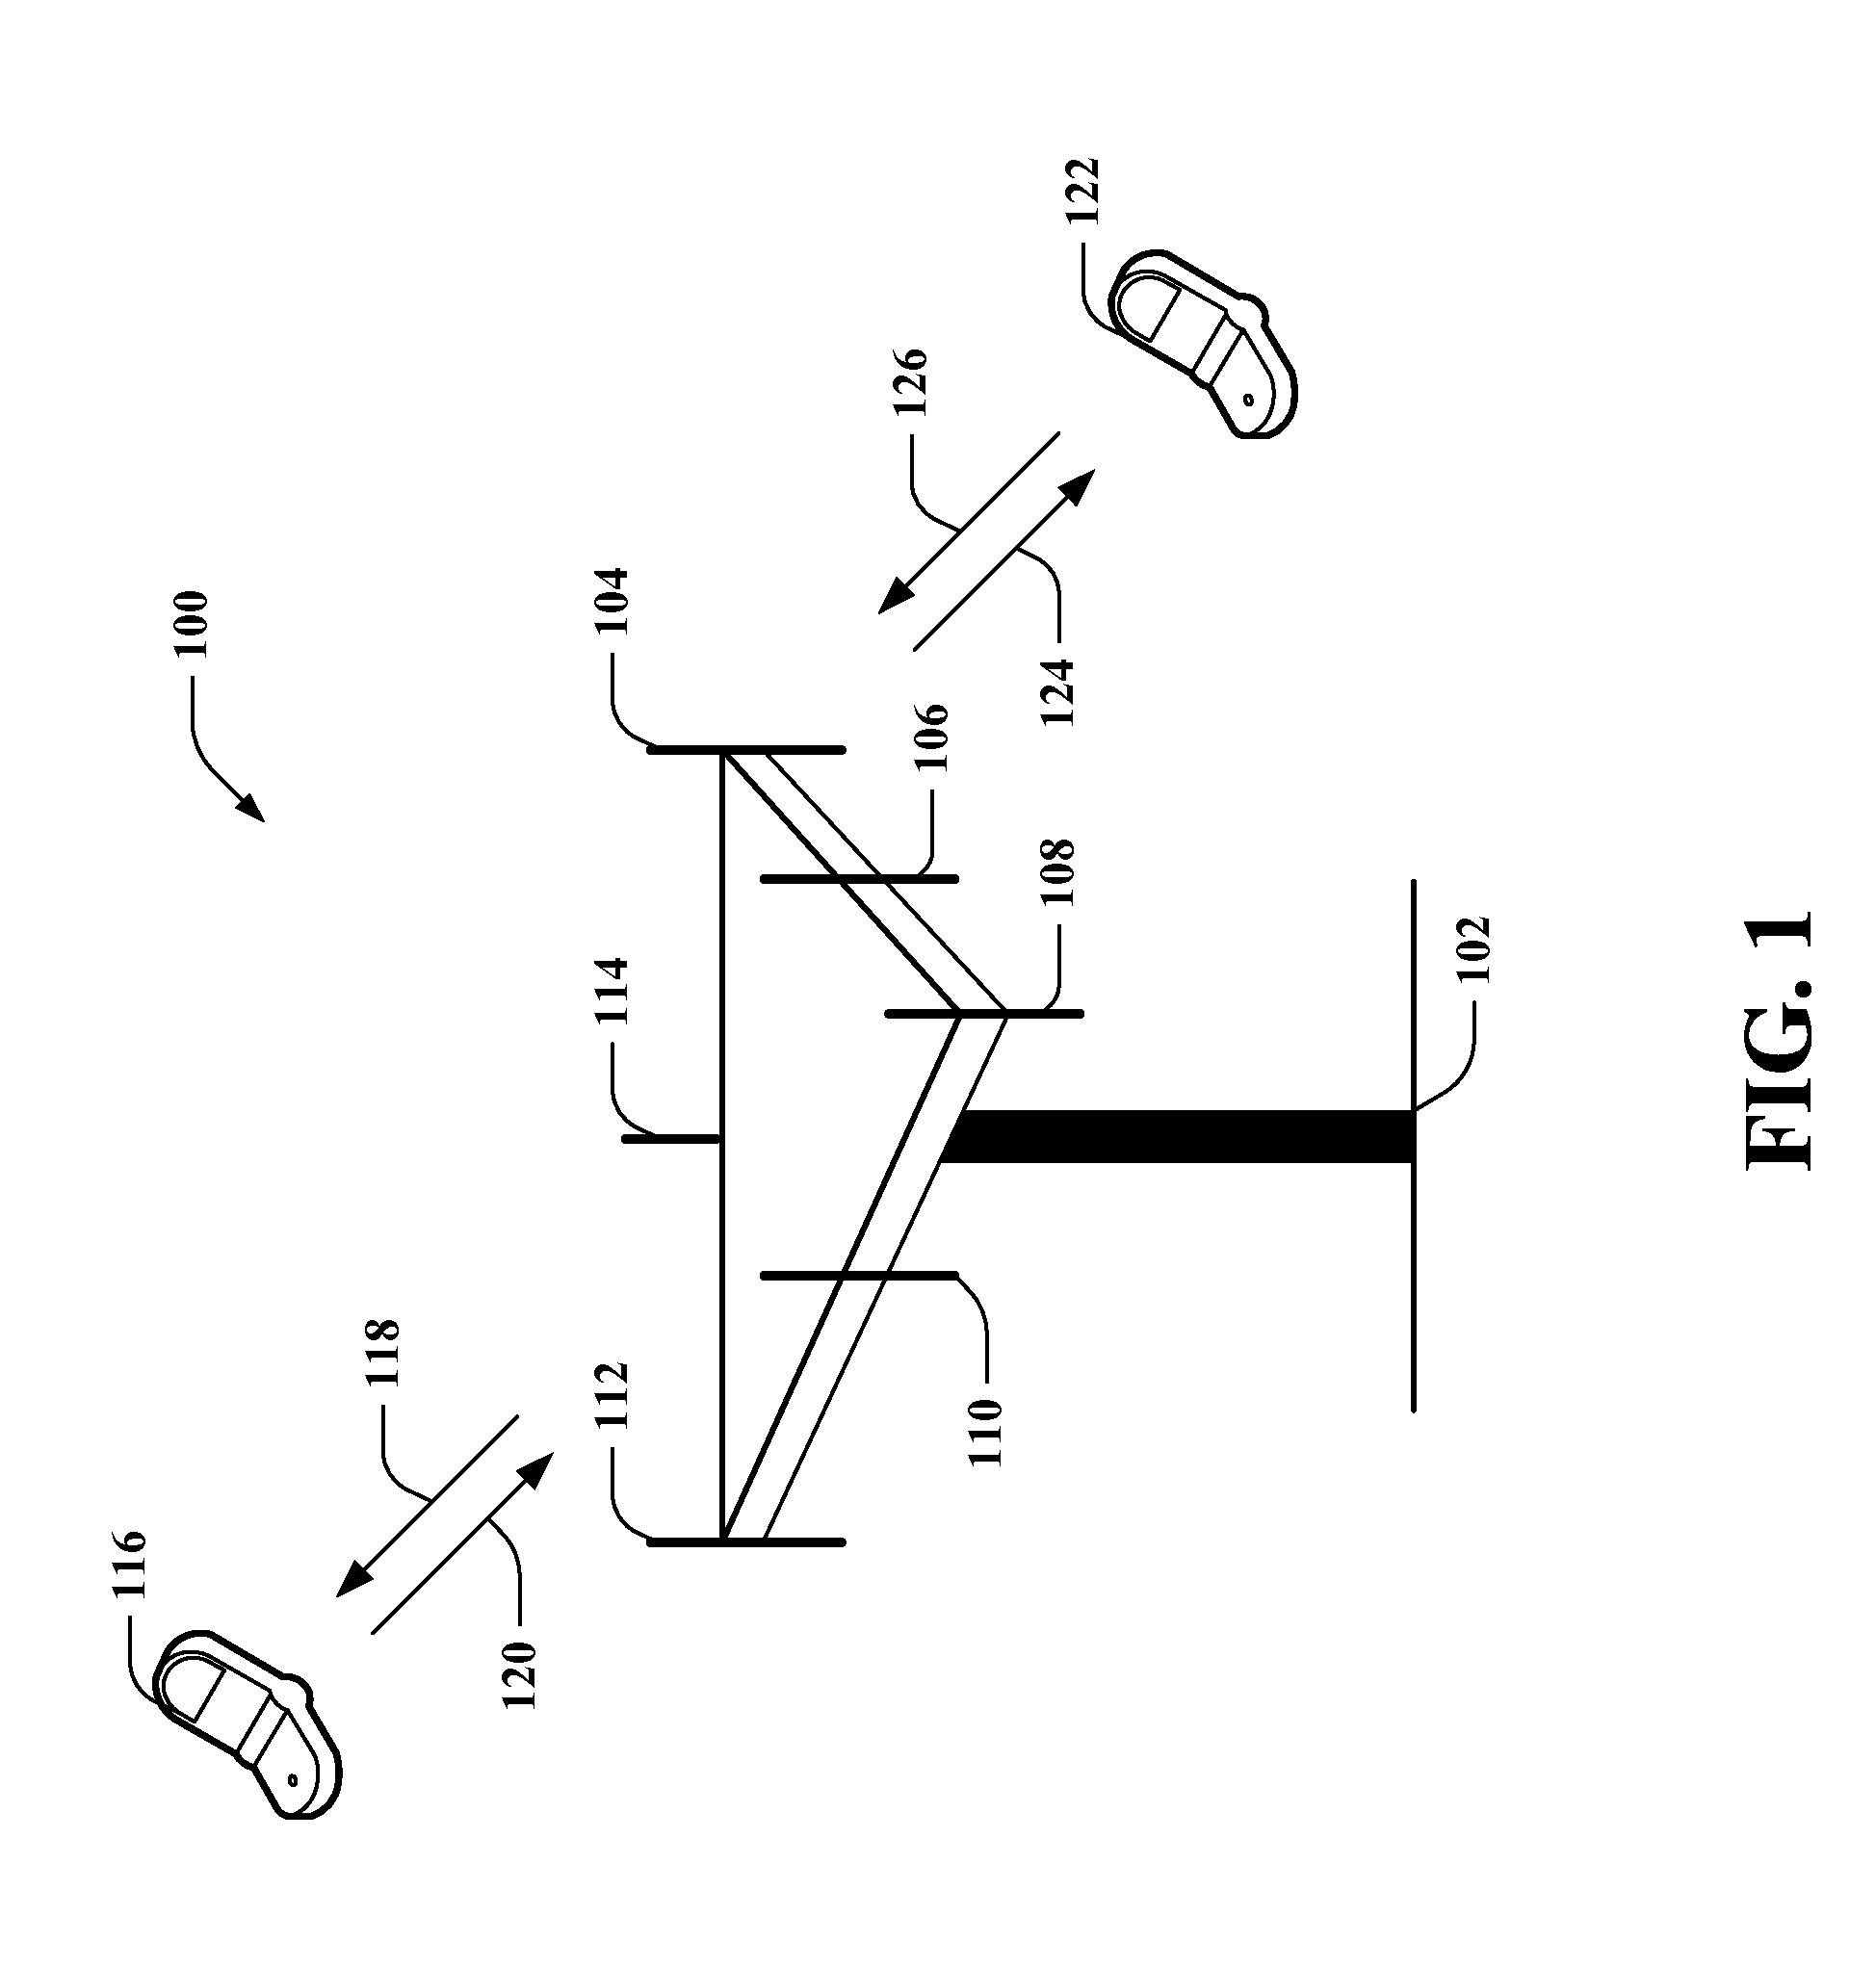 Interference mitigation by puncturing transmission of interfering cells